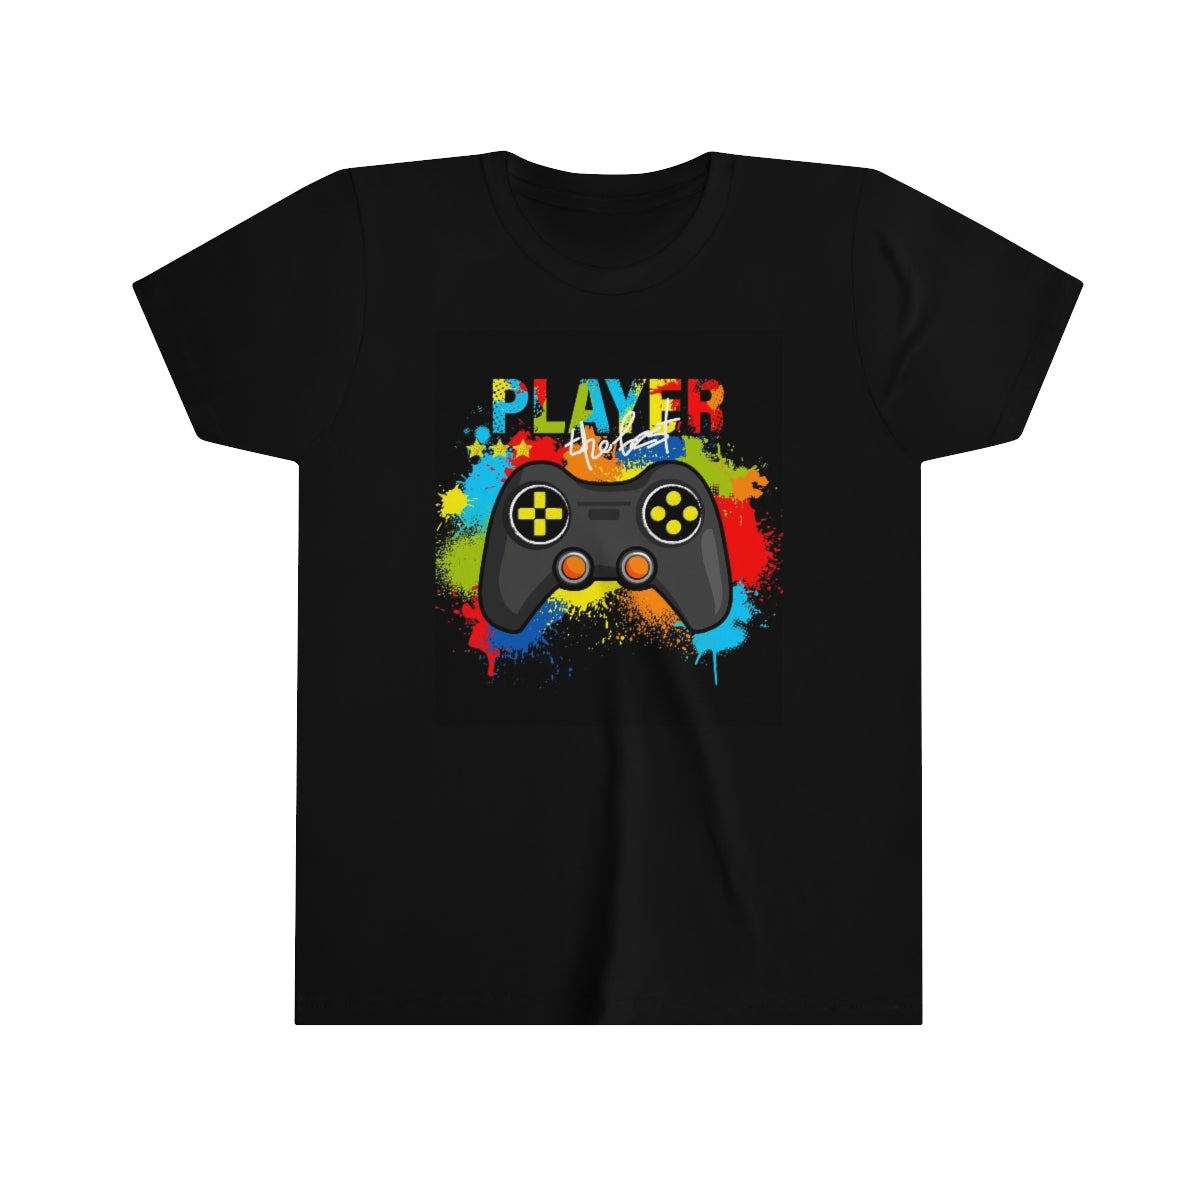 Youth Short Sleeve Tee "The best player"